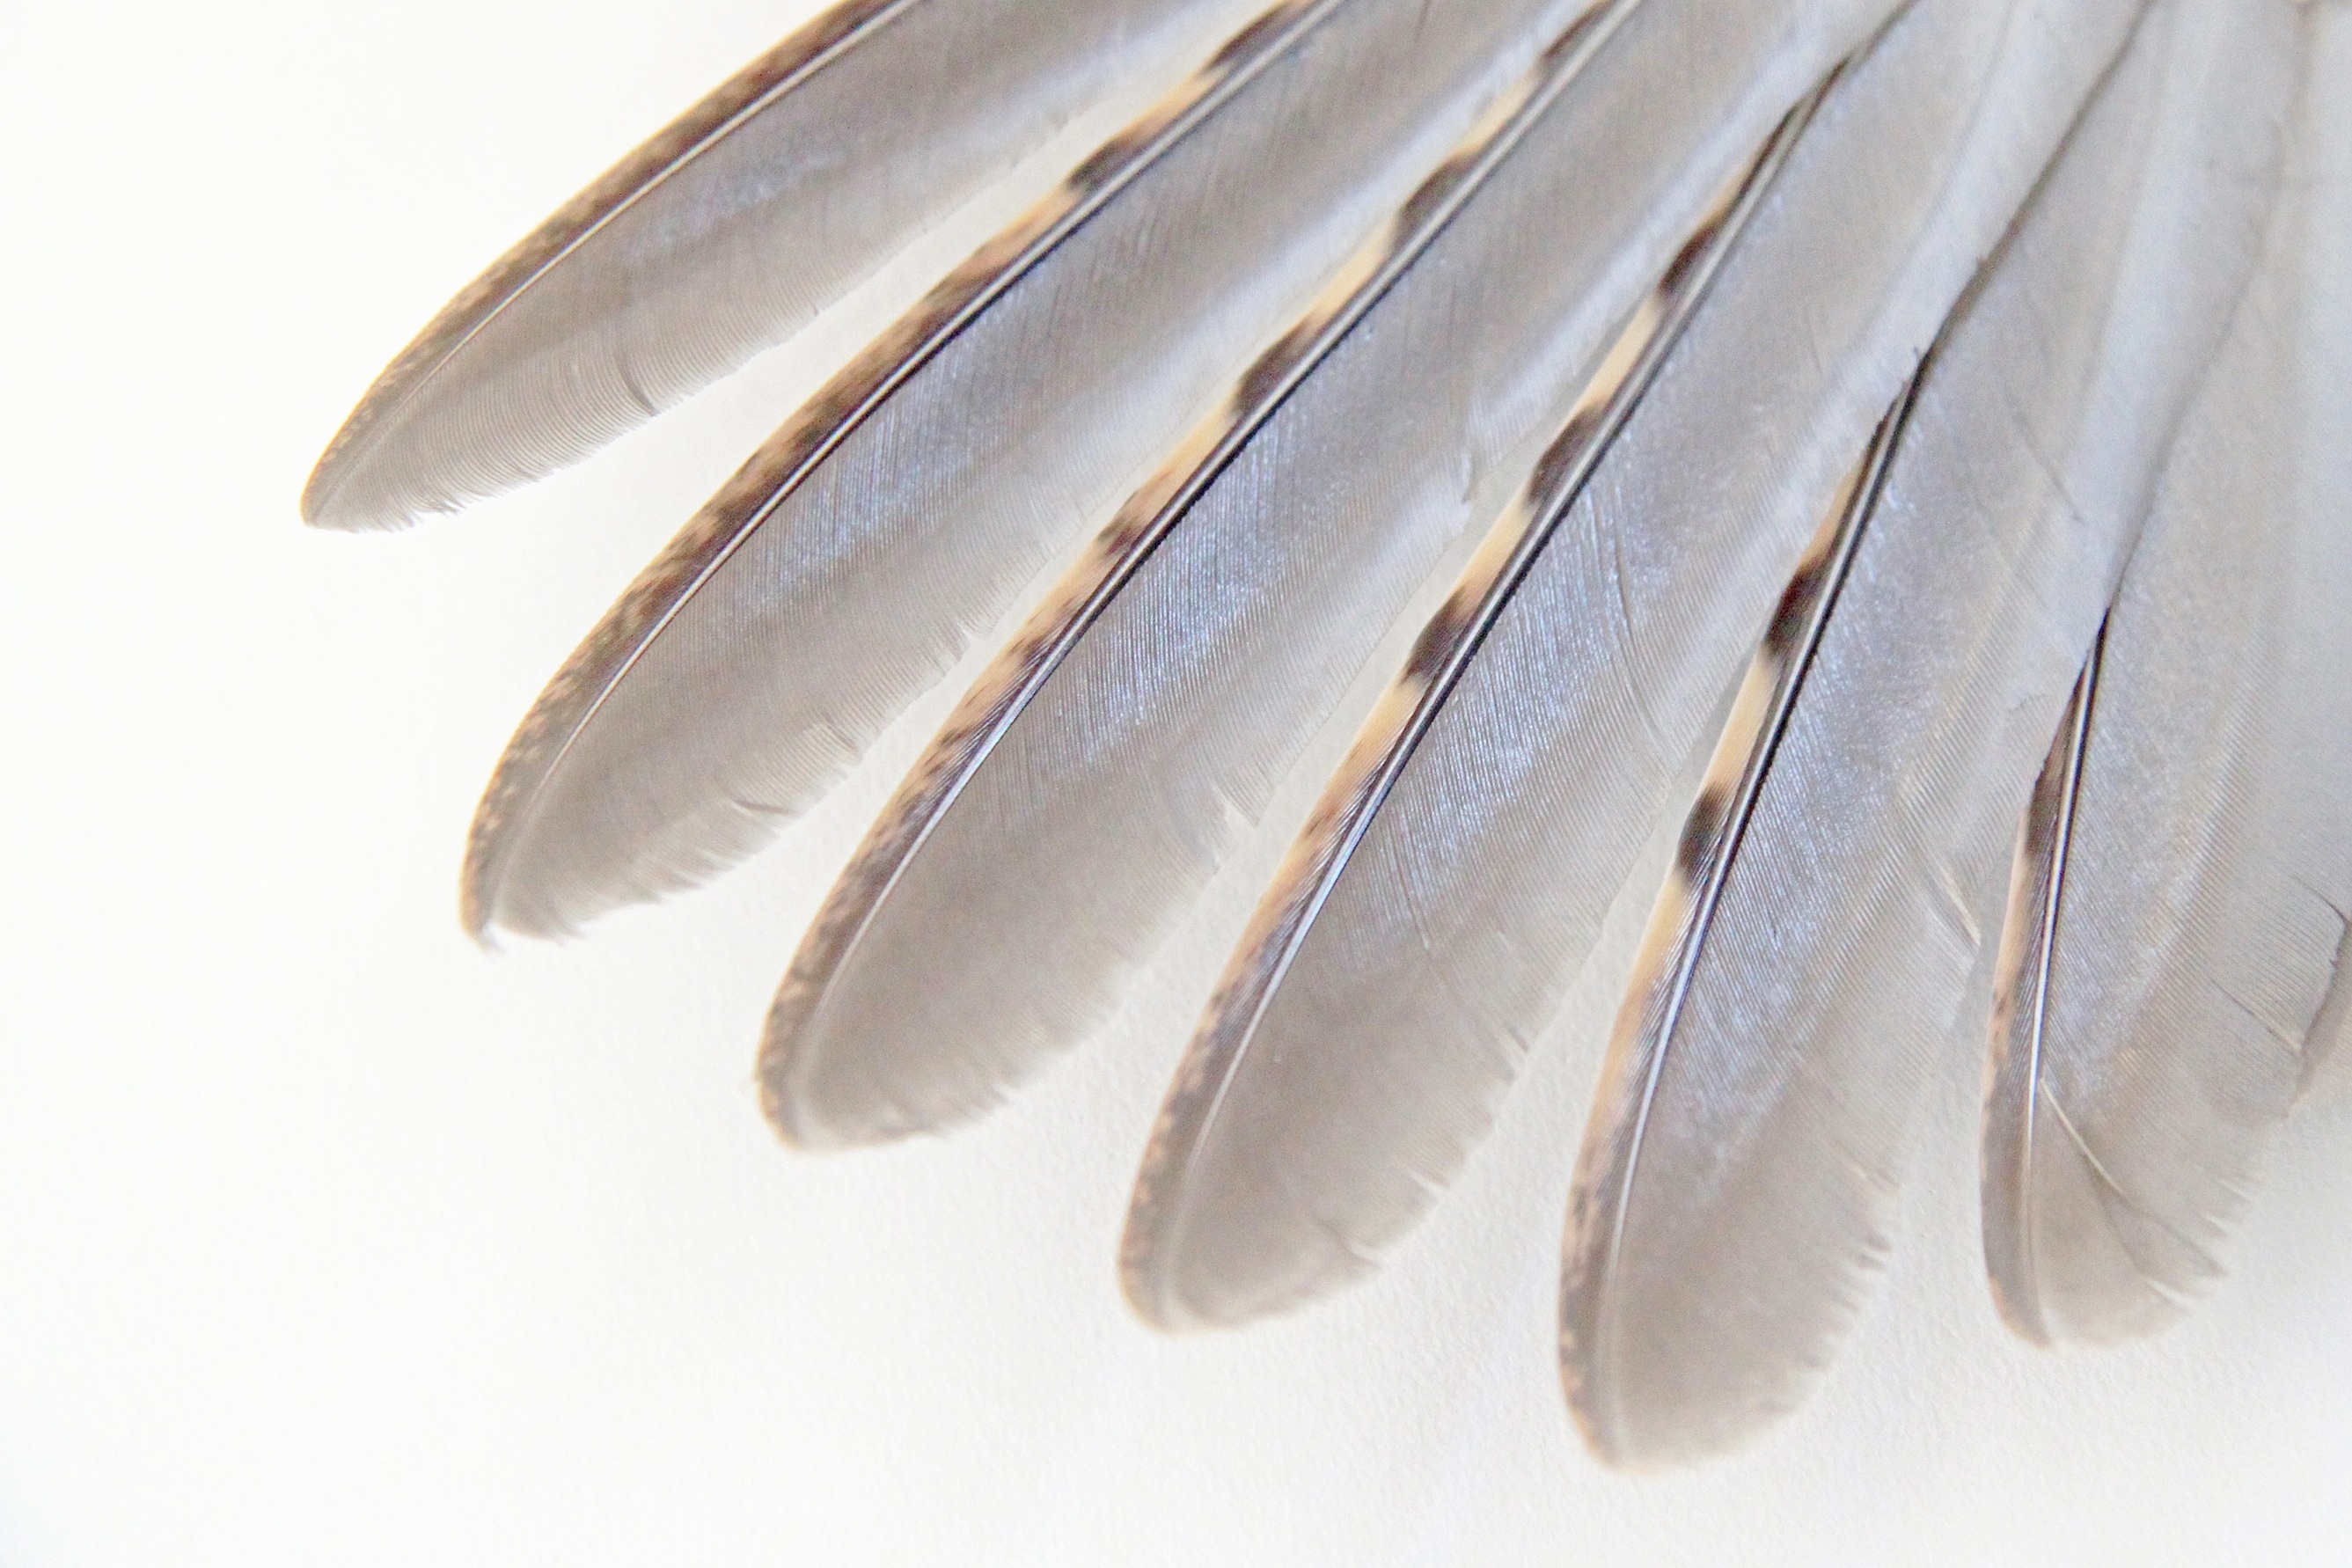 primary wing feathers of a ruffed grouse